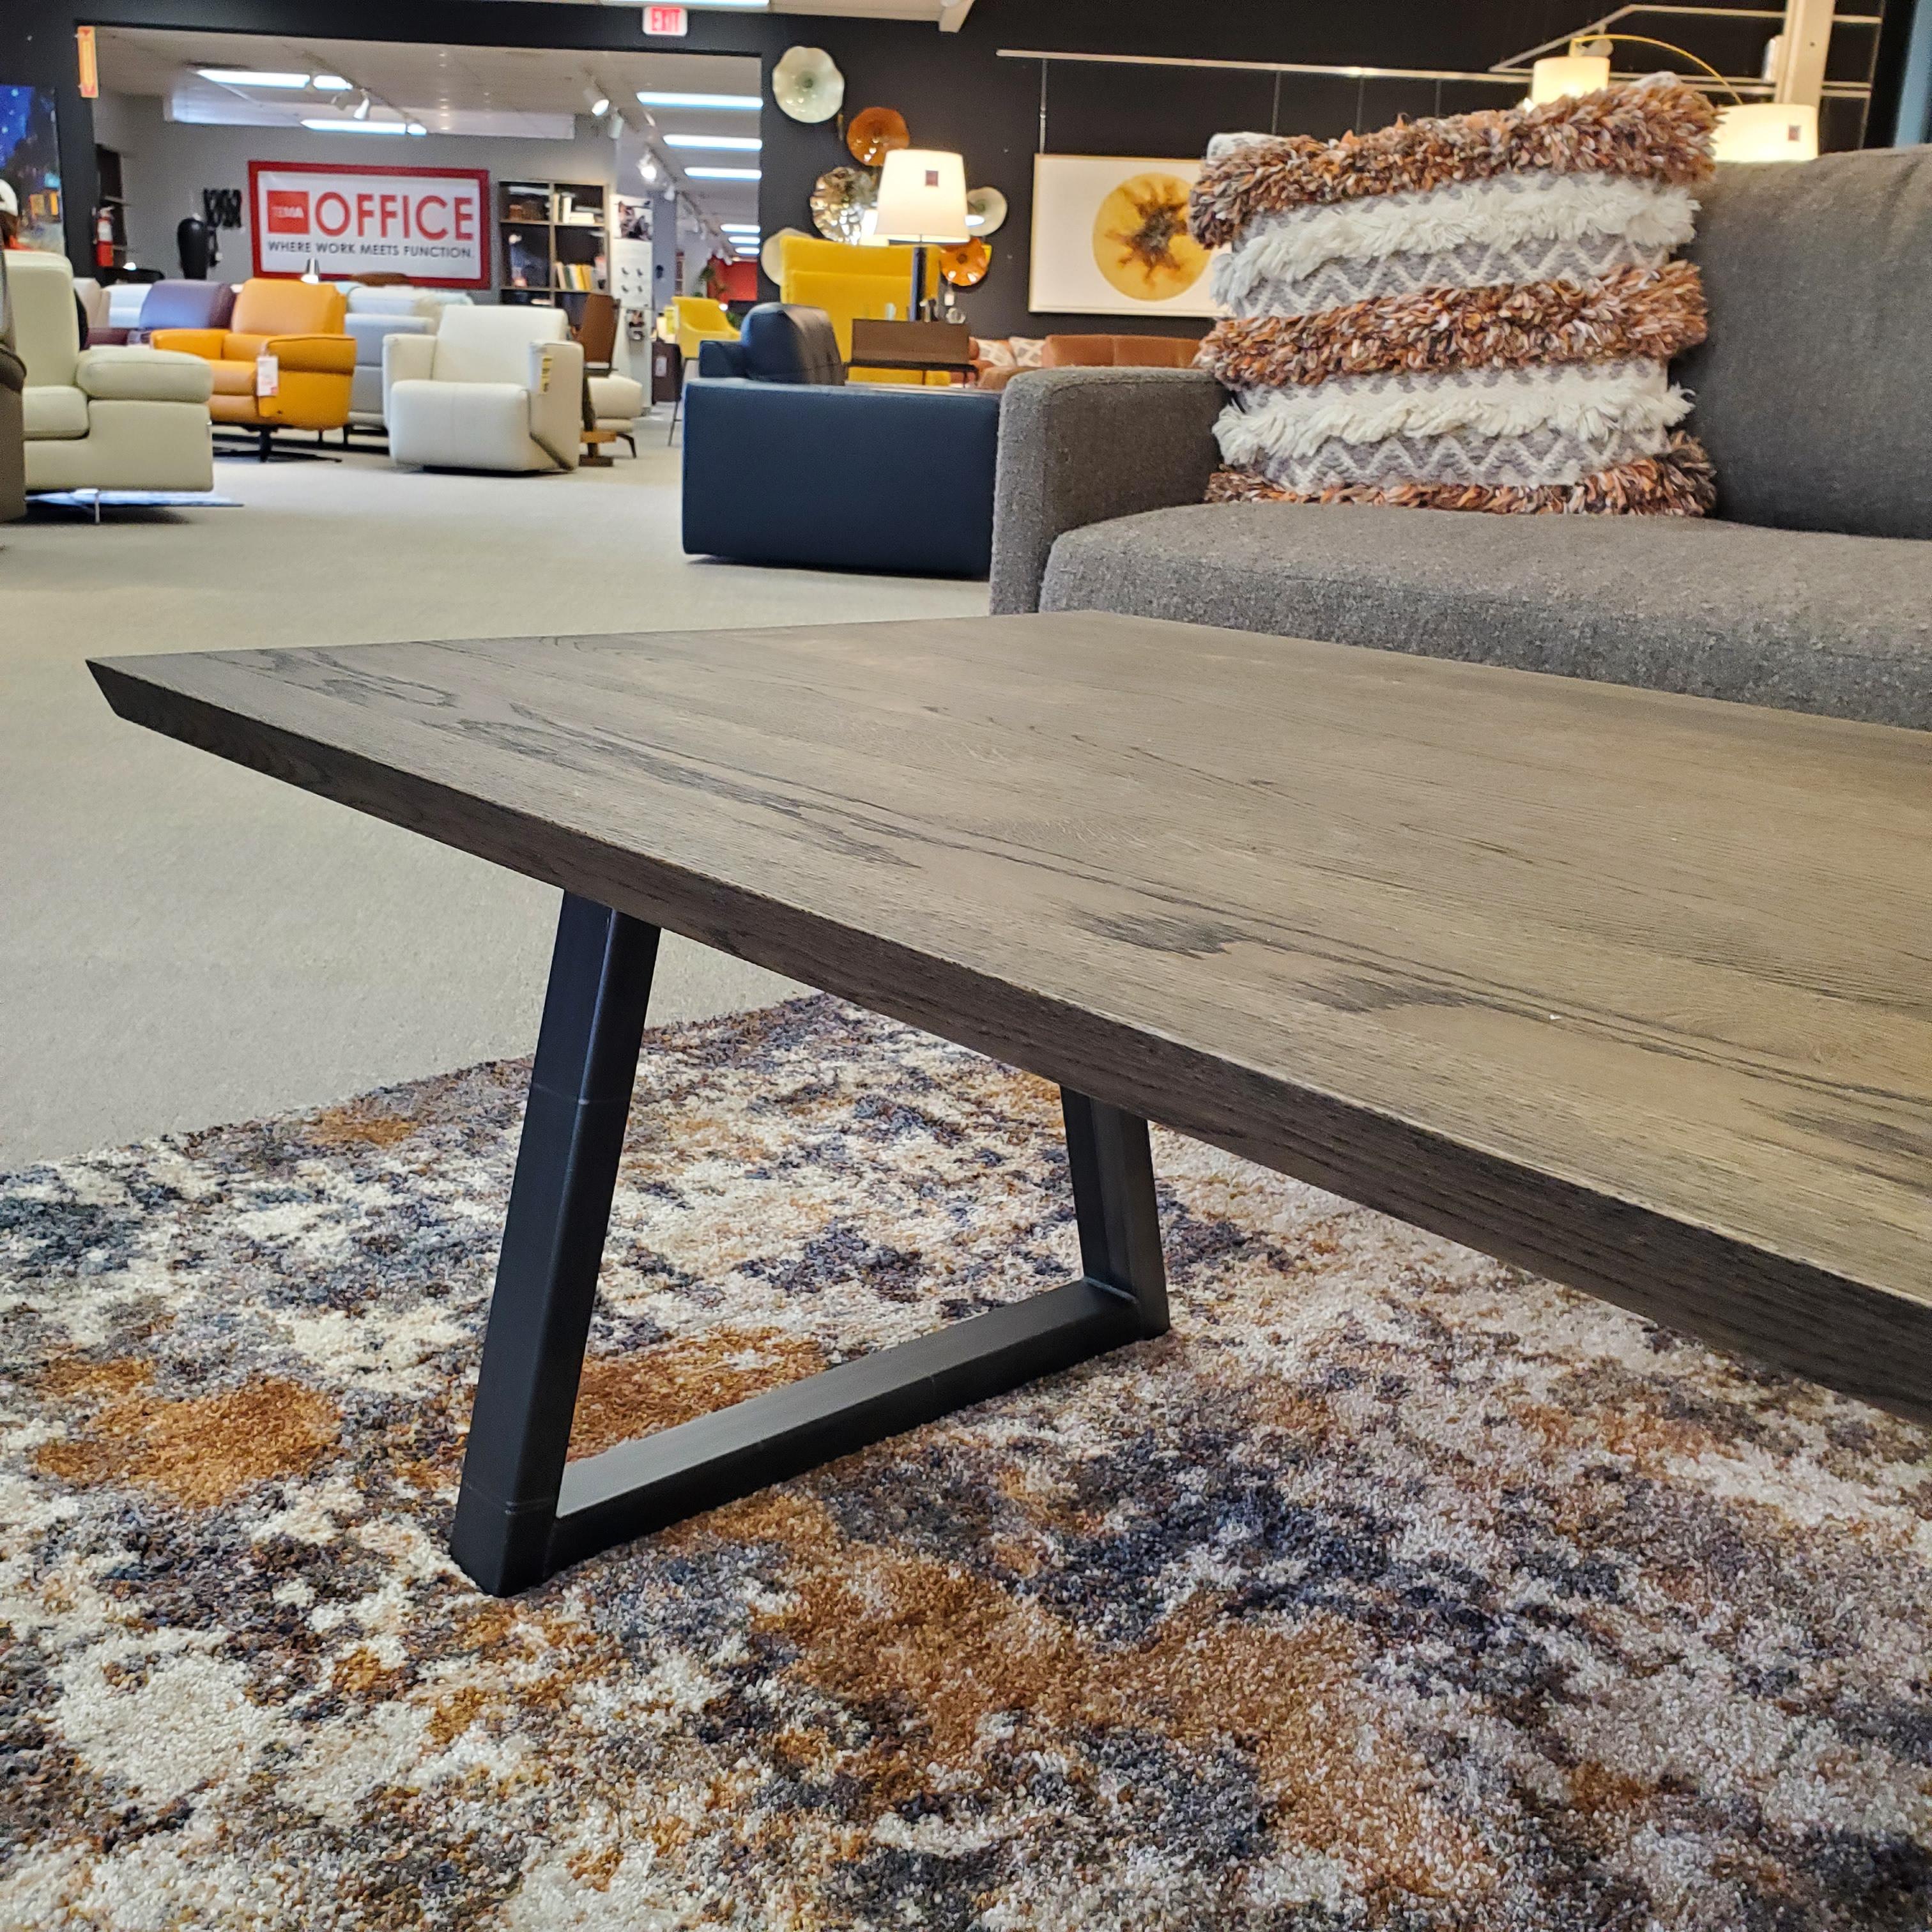 Forest Coffee Table Side View in Showroom